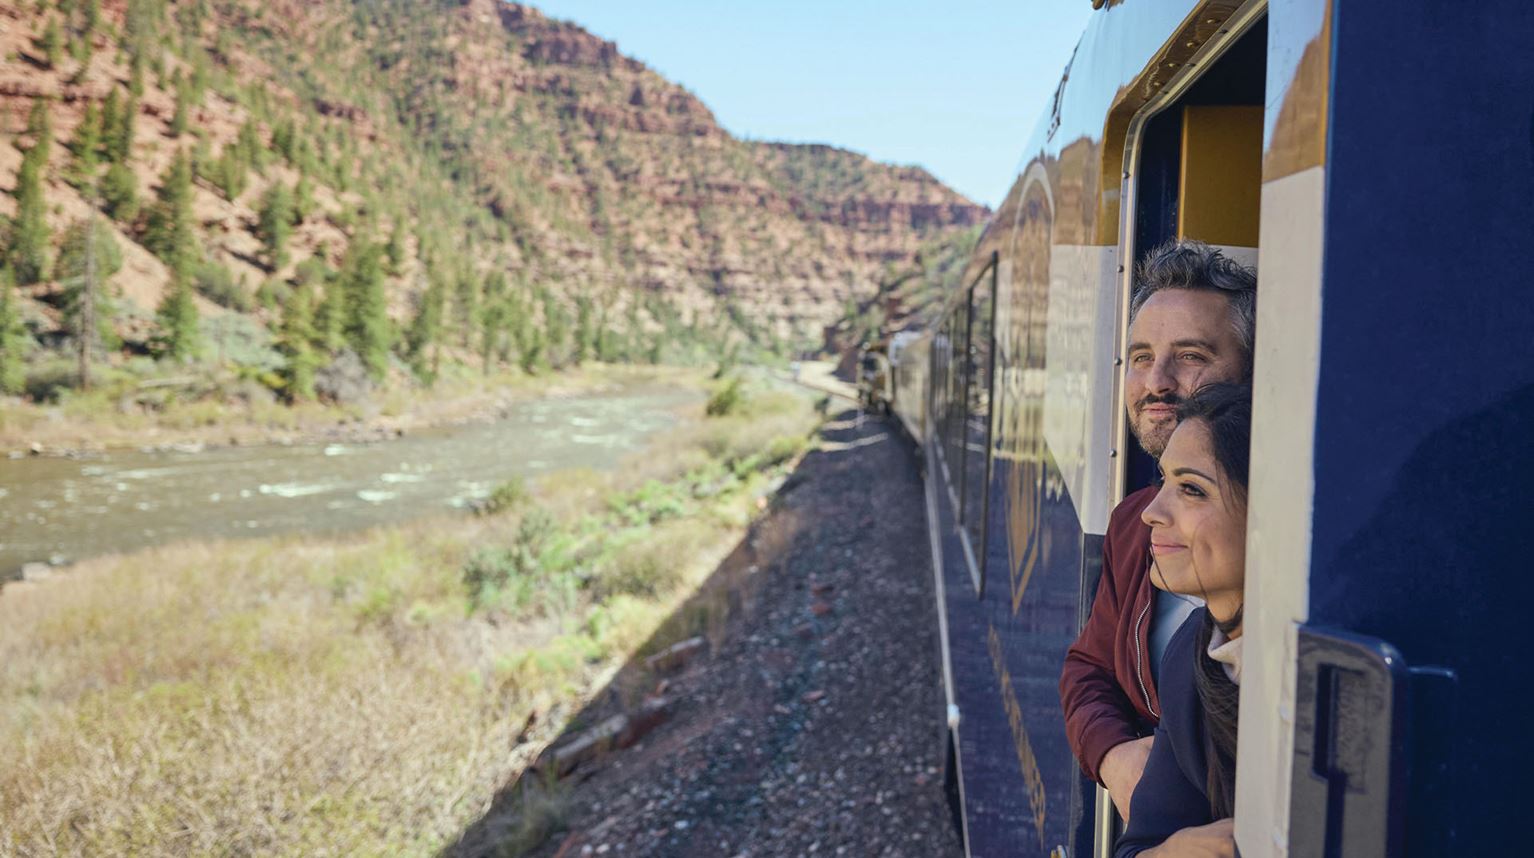 Two travellers looking the Red Canyon landscape on the outdoor viewing platform of a train